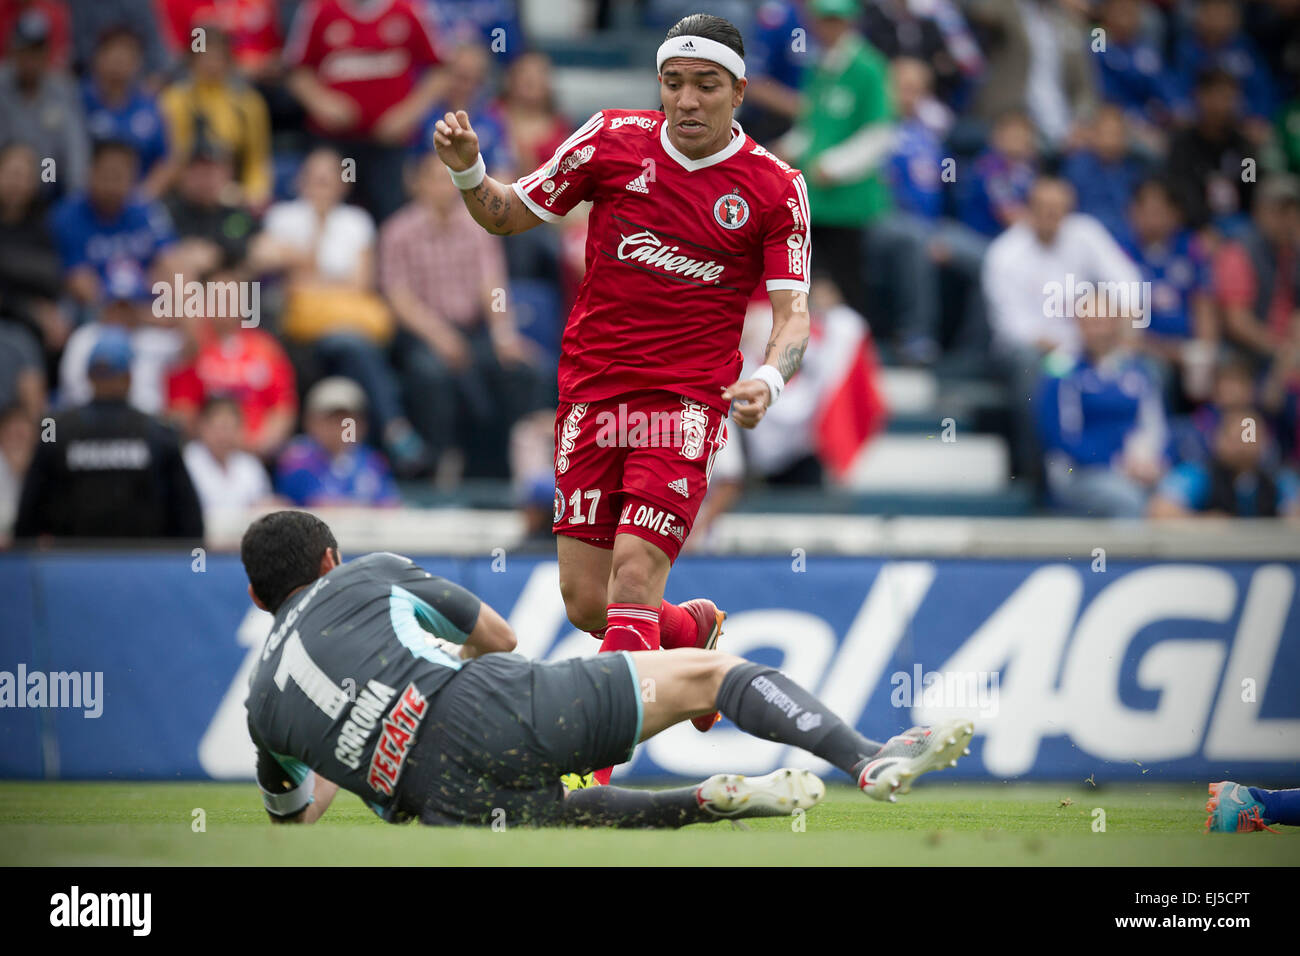 Mexico City, Mexico. 21st Mar, 2015. Cruz Azul's goalkeeper Jesus Corona (L) vies for the ball with Dayro Moreno (R) of Xolos during the match of 2015 Closing Tournament of MX League, in the Azul Stadium, in Mexico City, capital of Mexico, on March 21, 2015. © Alejandro Ayala/Xinhua/Alamy Live News Stock Photo